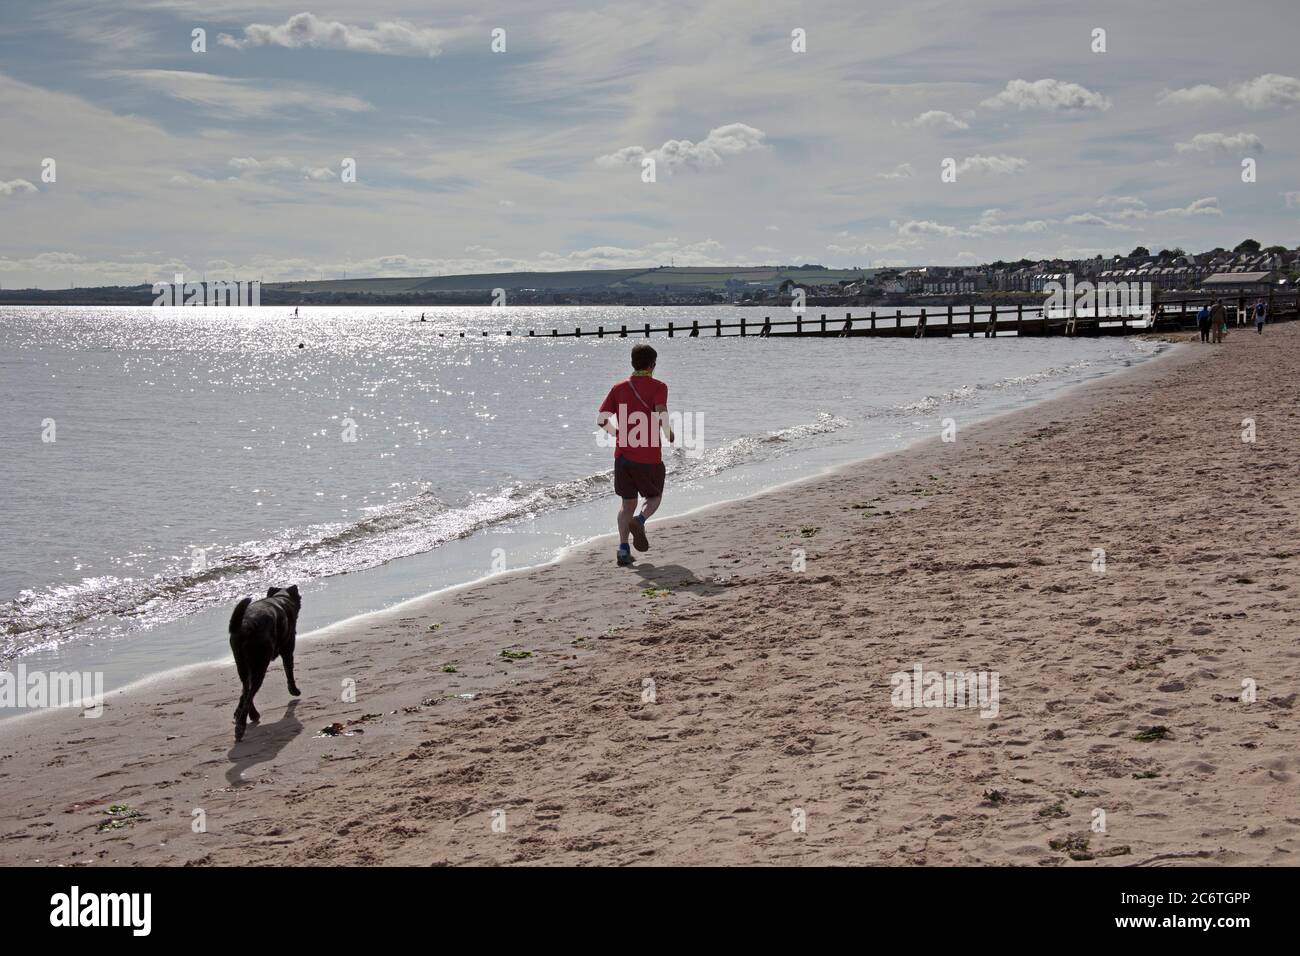 Portobello, Edinburgh, Scotland, UK 12 July 2020.Temperature 13 degrees in the morning rising to 18 degrees in afternoon with very little breeze. Pictured man running with his dog in pursuit very popular over the last three months of the Coronavirus pandemic as people of all ages have healthier pursuits in their leisure time. Stock Photo